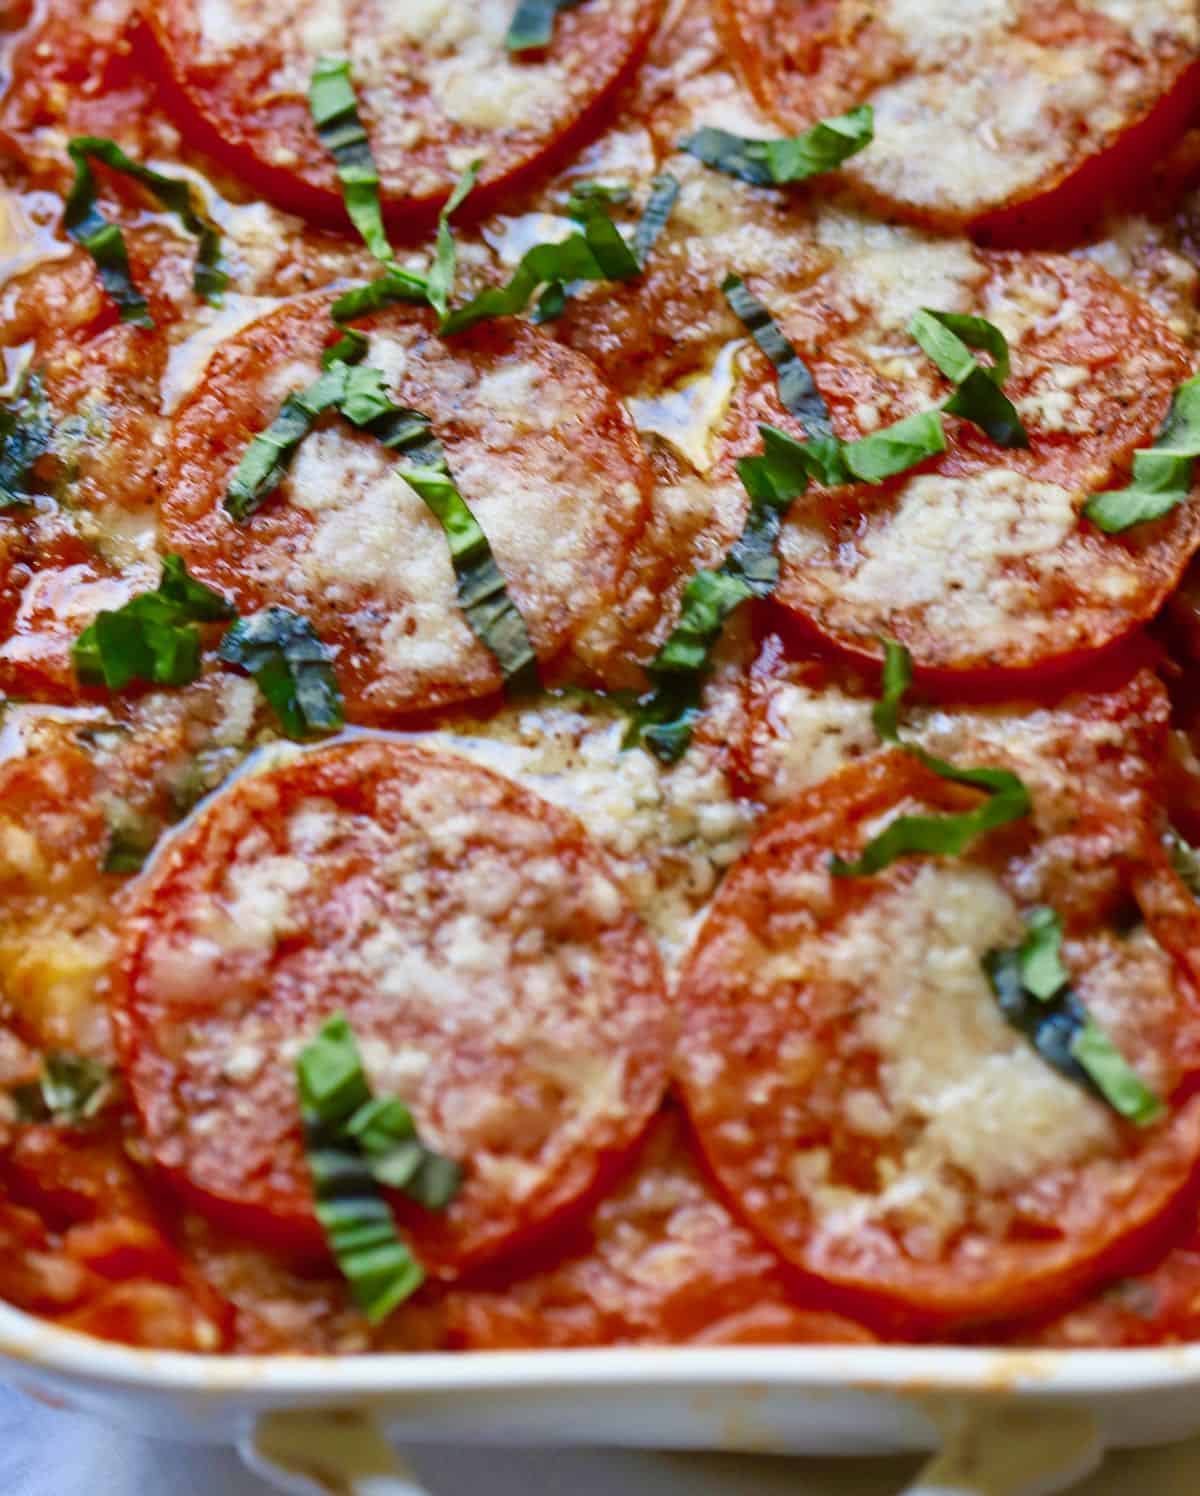 Fresh basil and parmesan cheese top a baked tomato casserole.